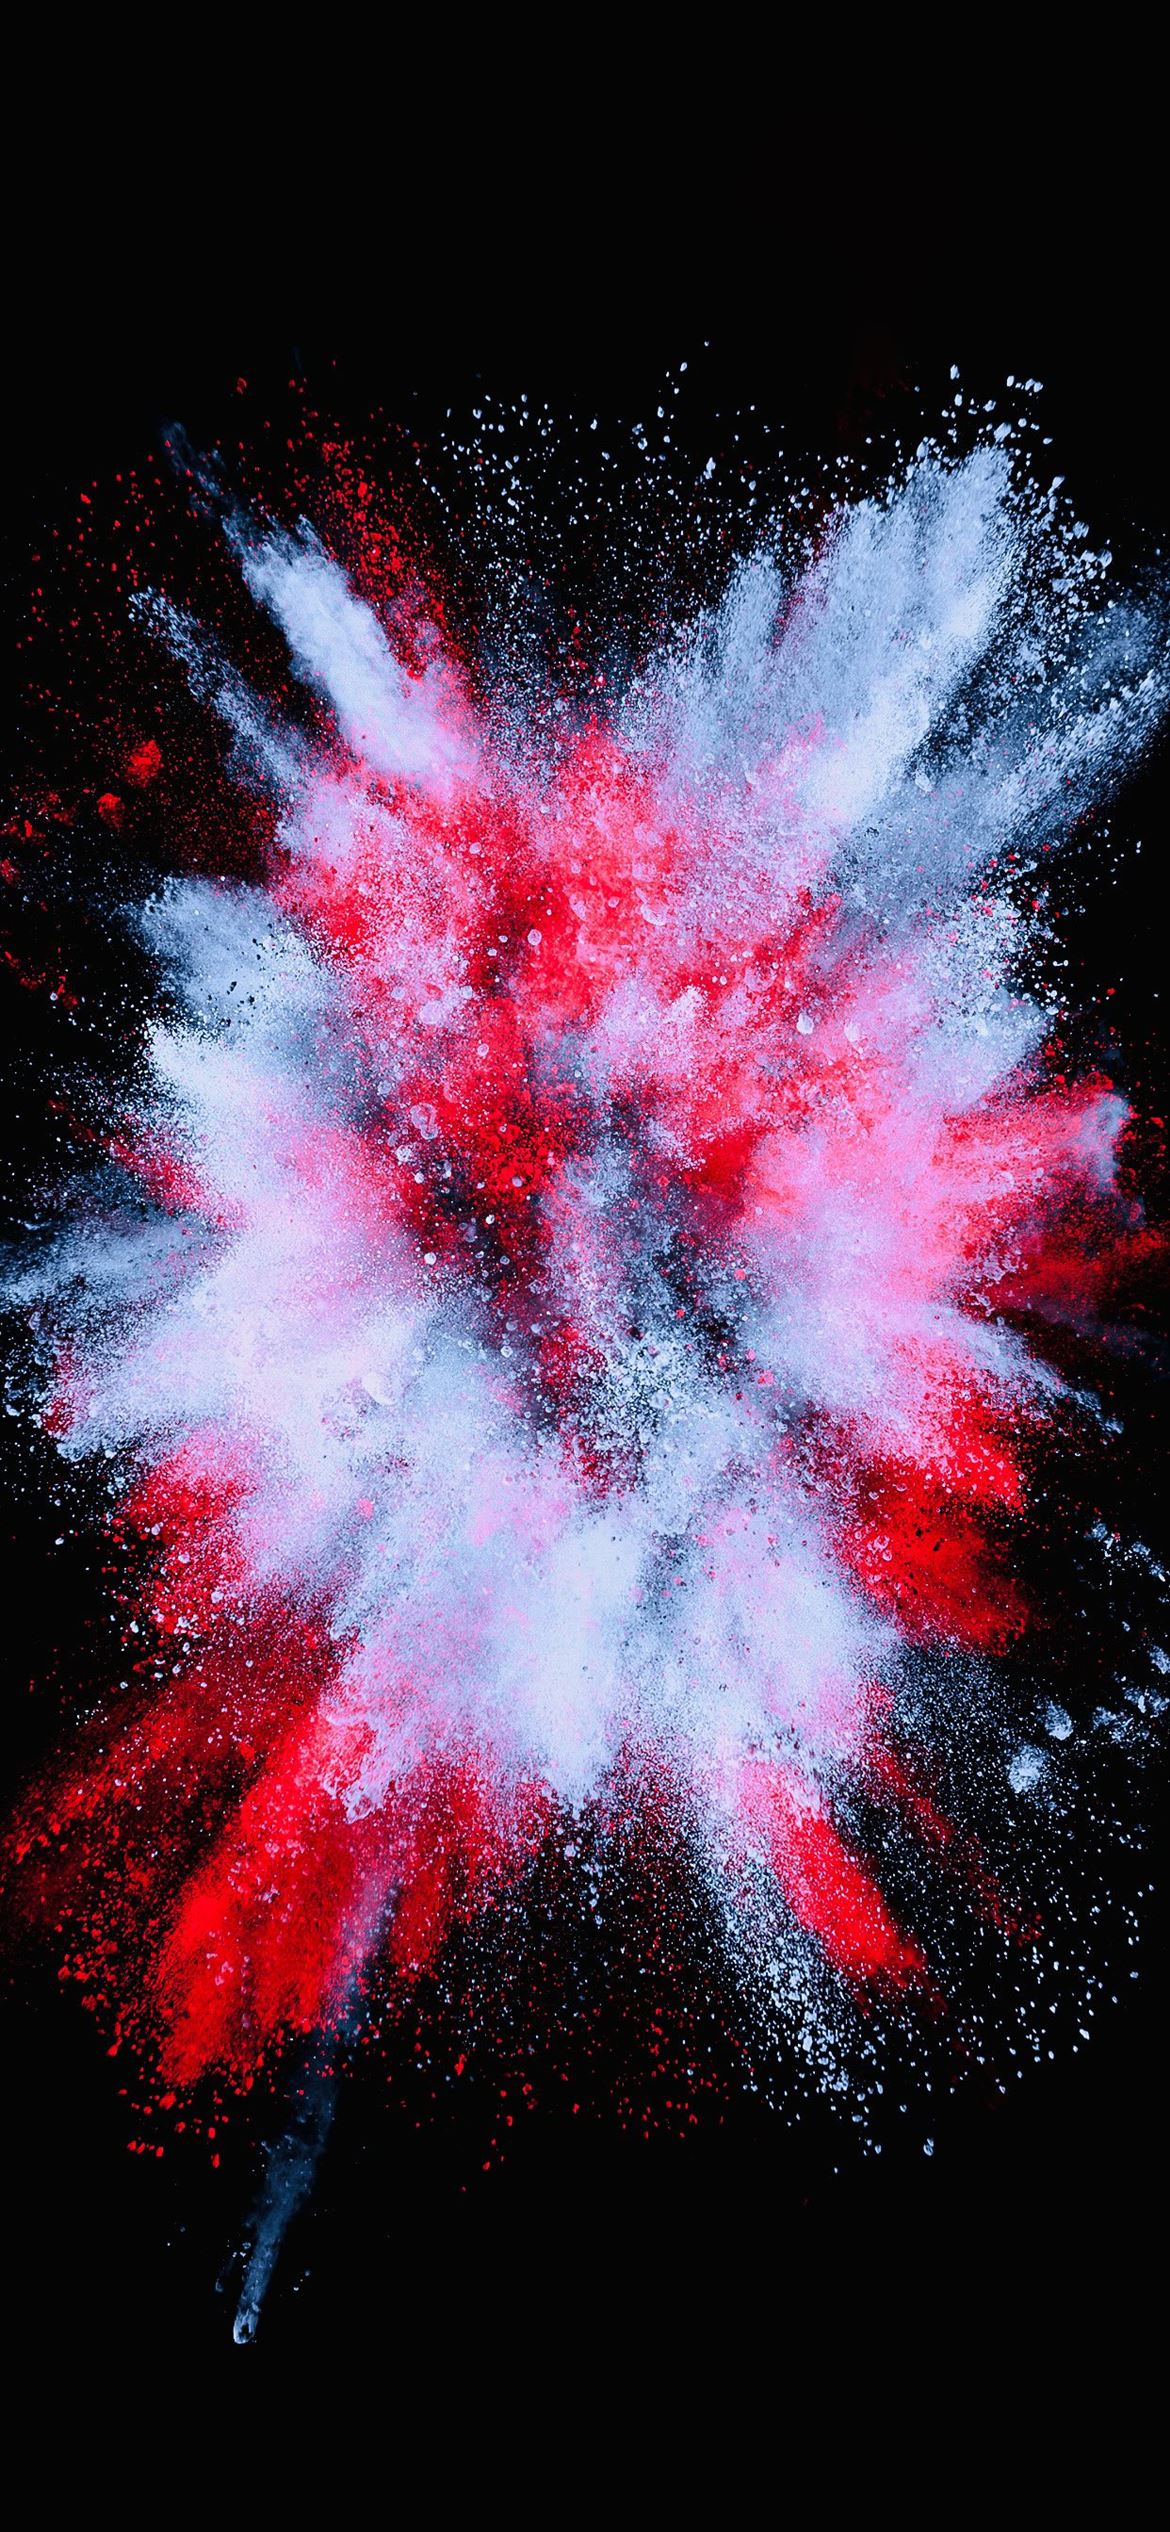 A red and white explosion on black - Crimson, colorful